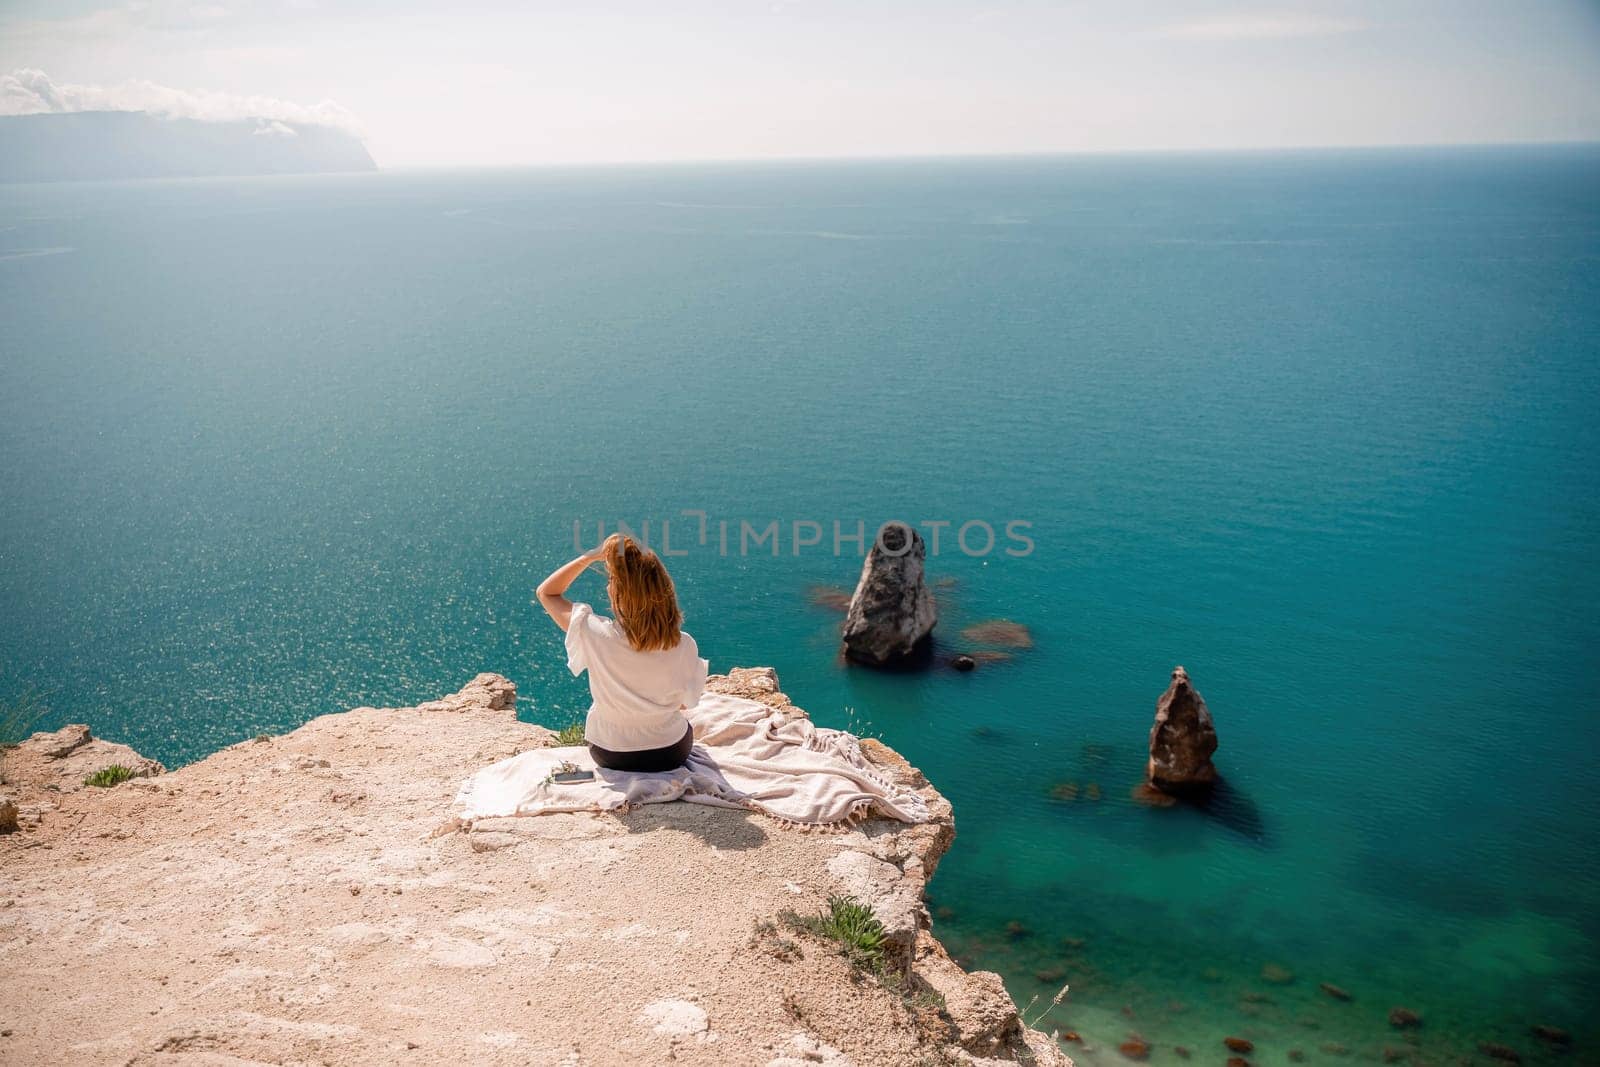 A woman is sitting on a rock overlooking the ocean. She is pointing to the water. The scene is peaceful and serene, with the woman enjoying the view and the calming sound of the waves